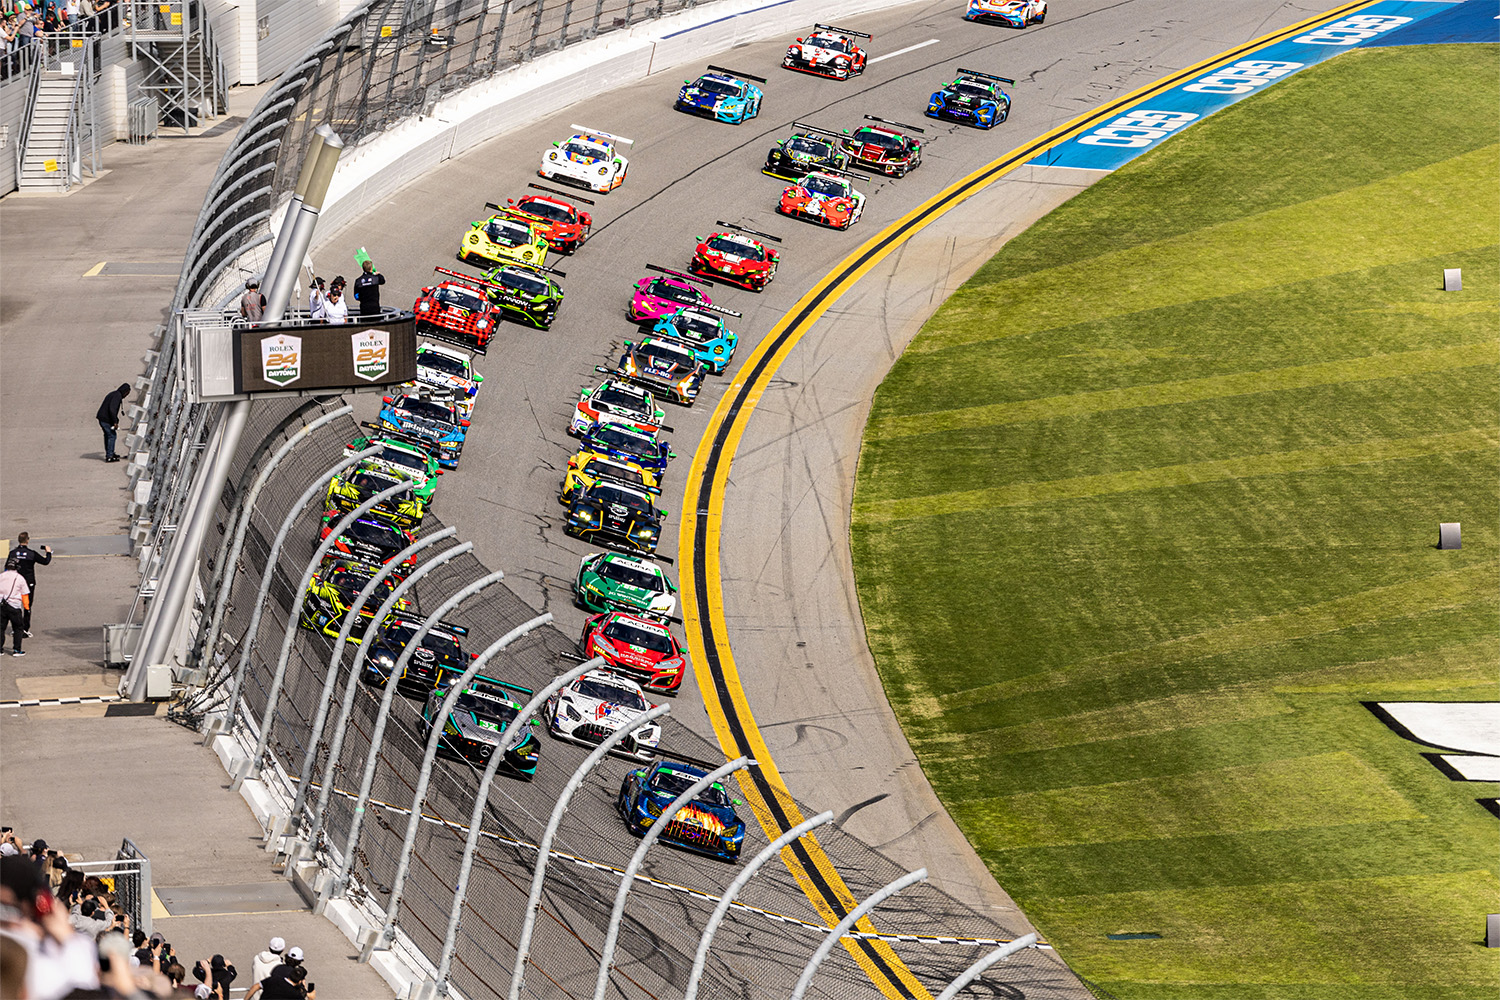 The GT Classes start the 61st running of the Rolex 24 at Daytona.